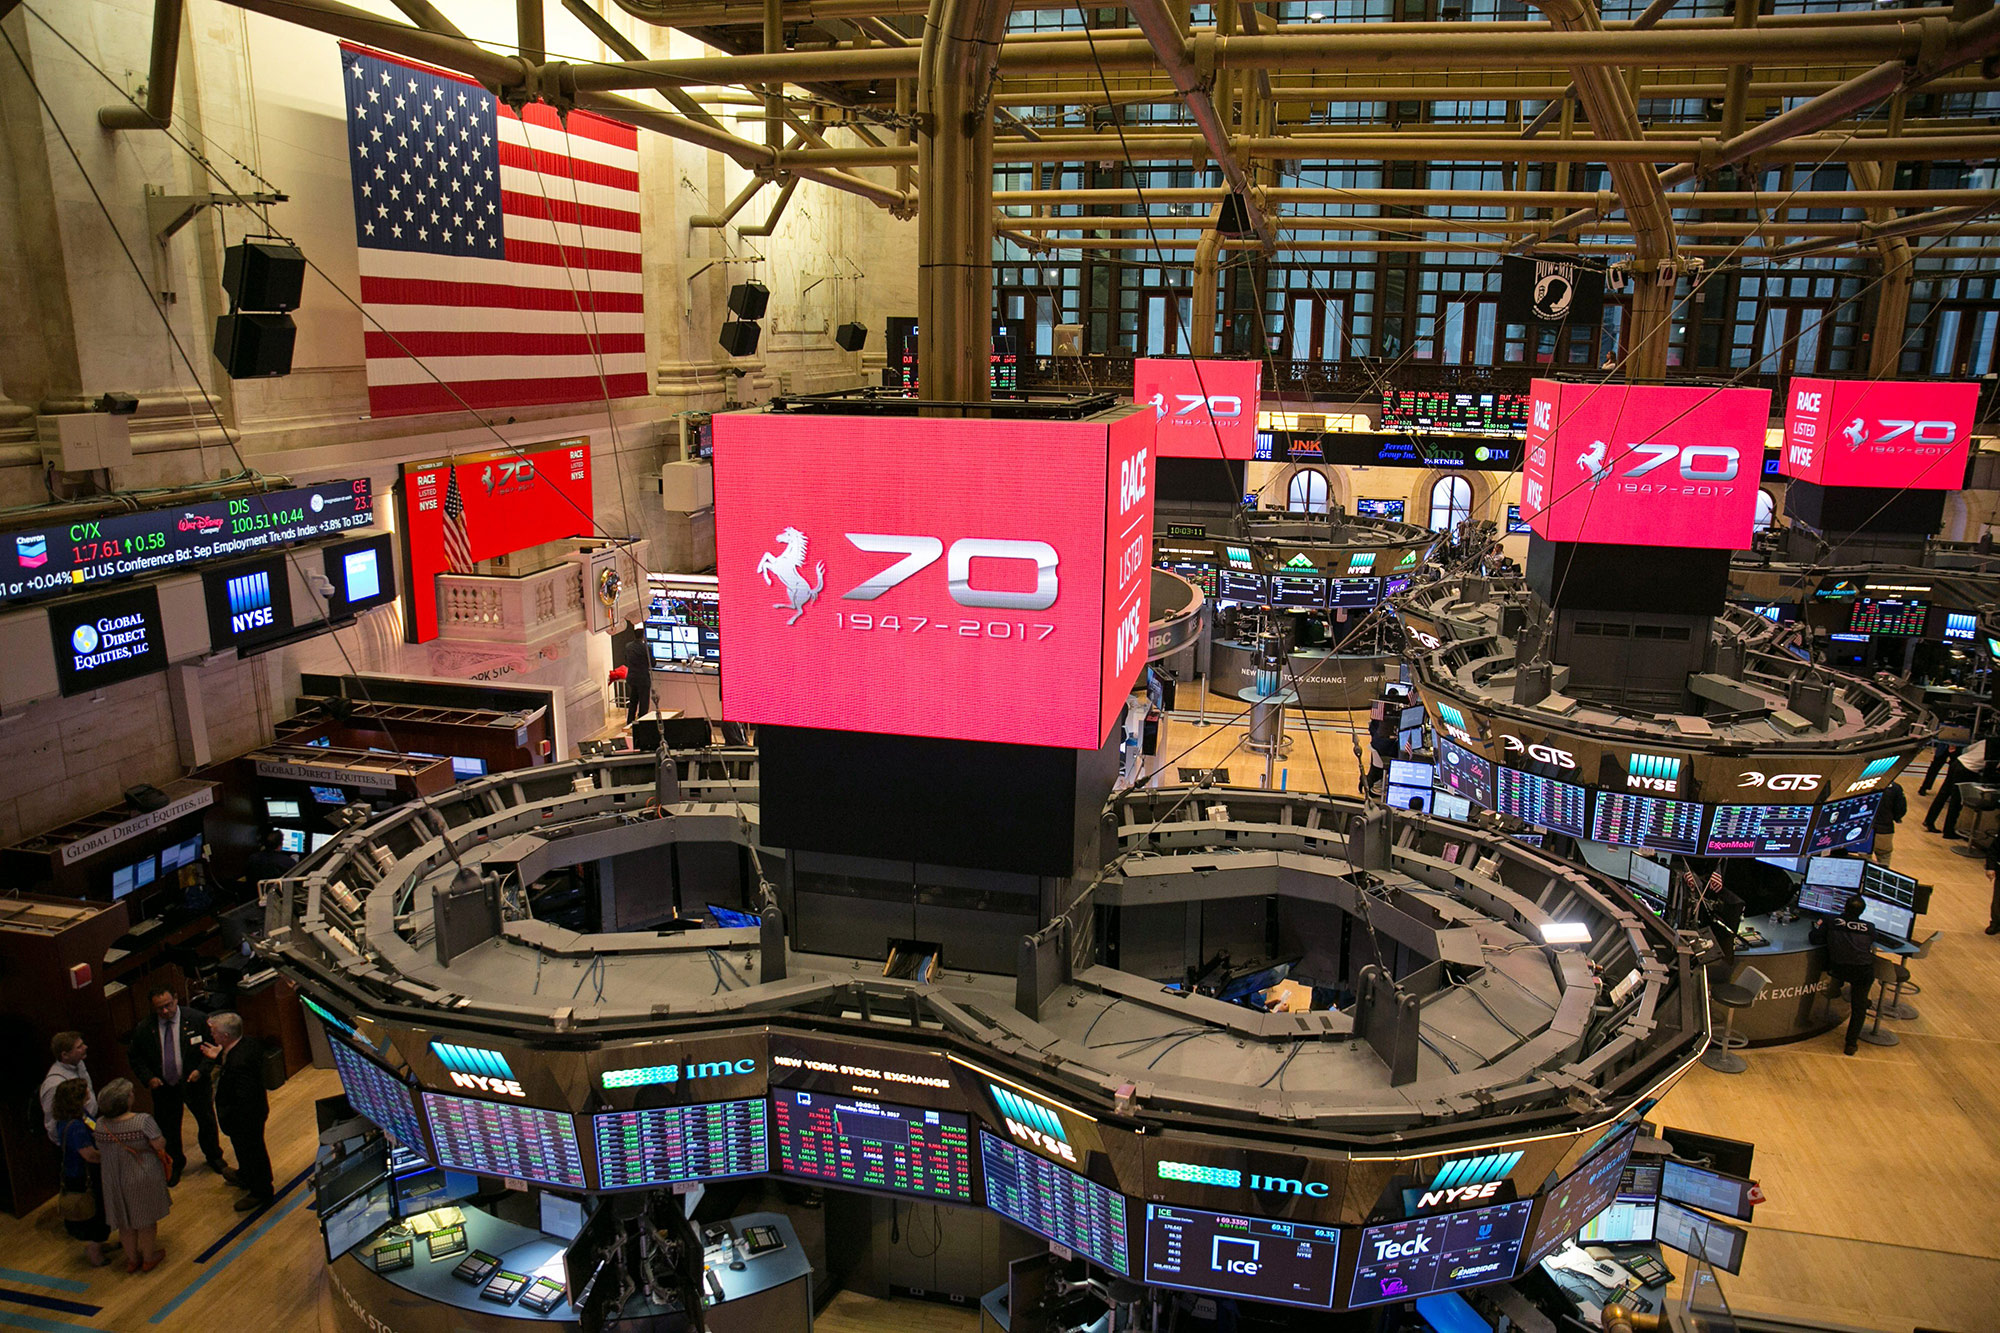 nyse recent ipos